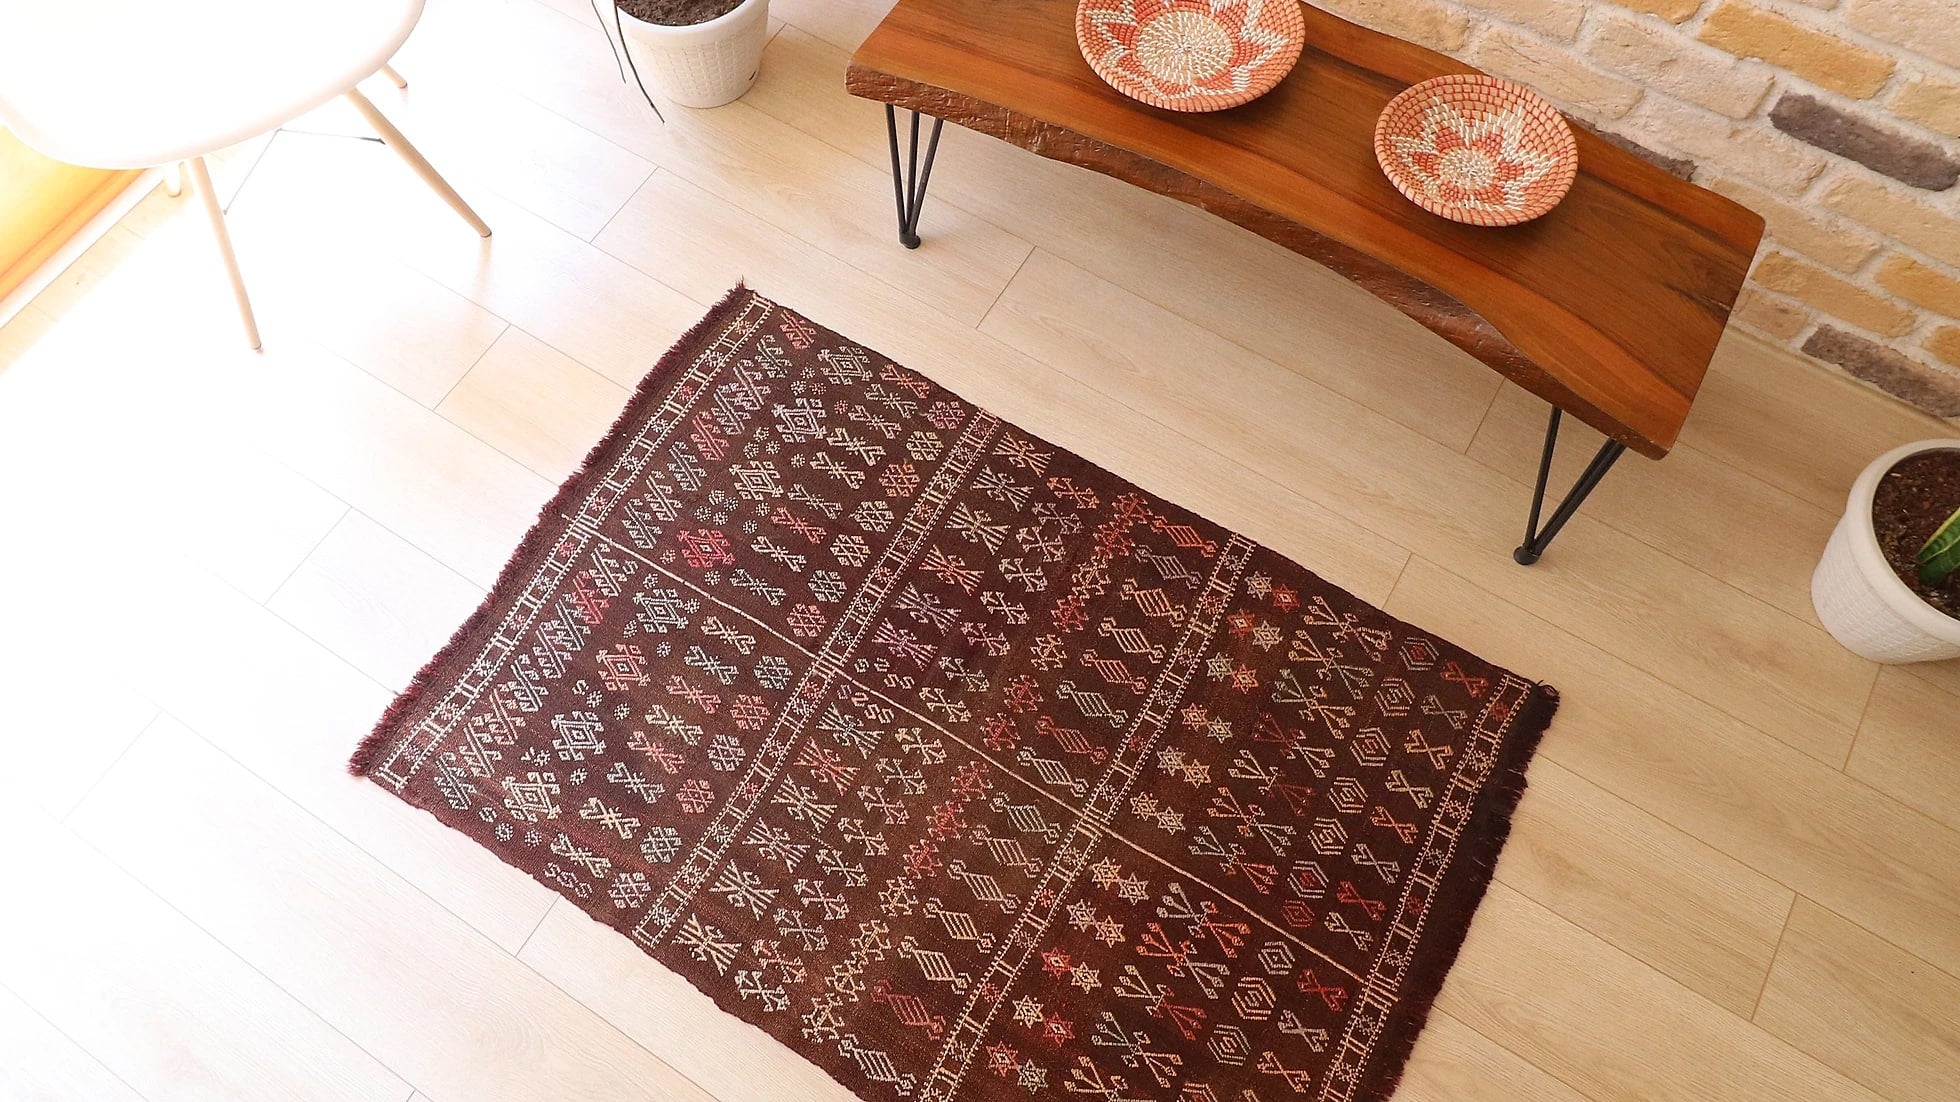 mid-century handmade moroccan flat-woven Kilim Rug with tribal motifs in muted earthy taupe and terracotta shades measuring 3x5 ft